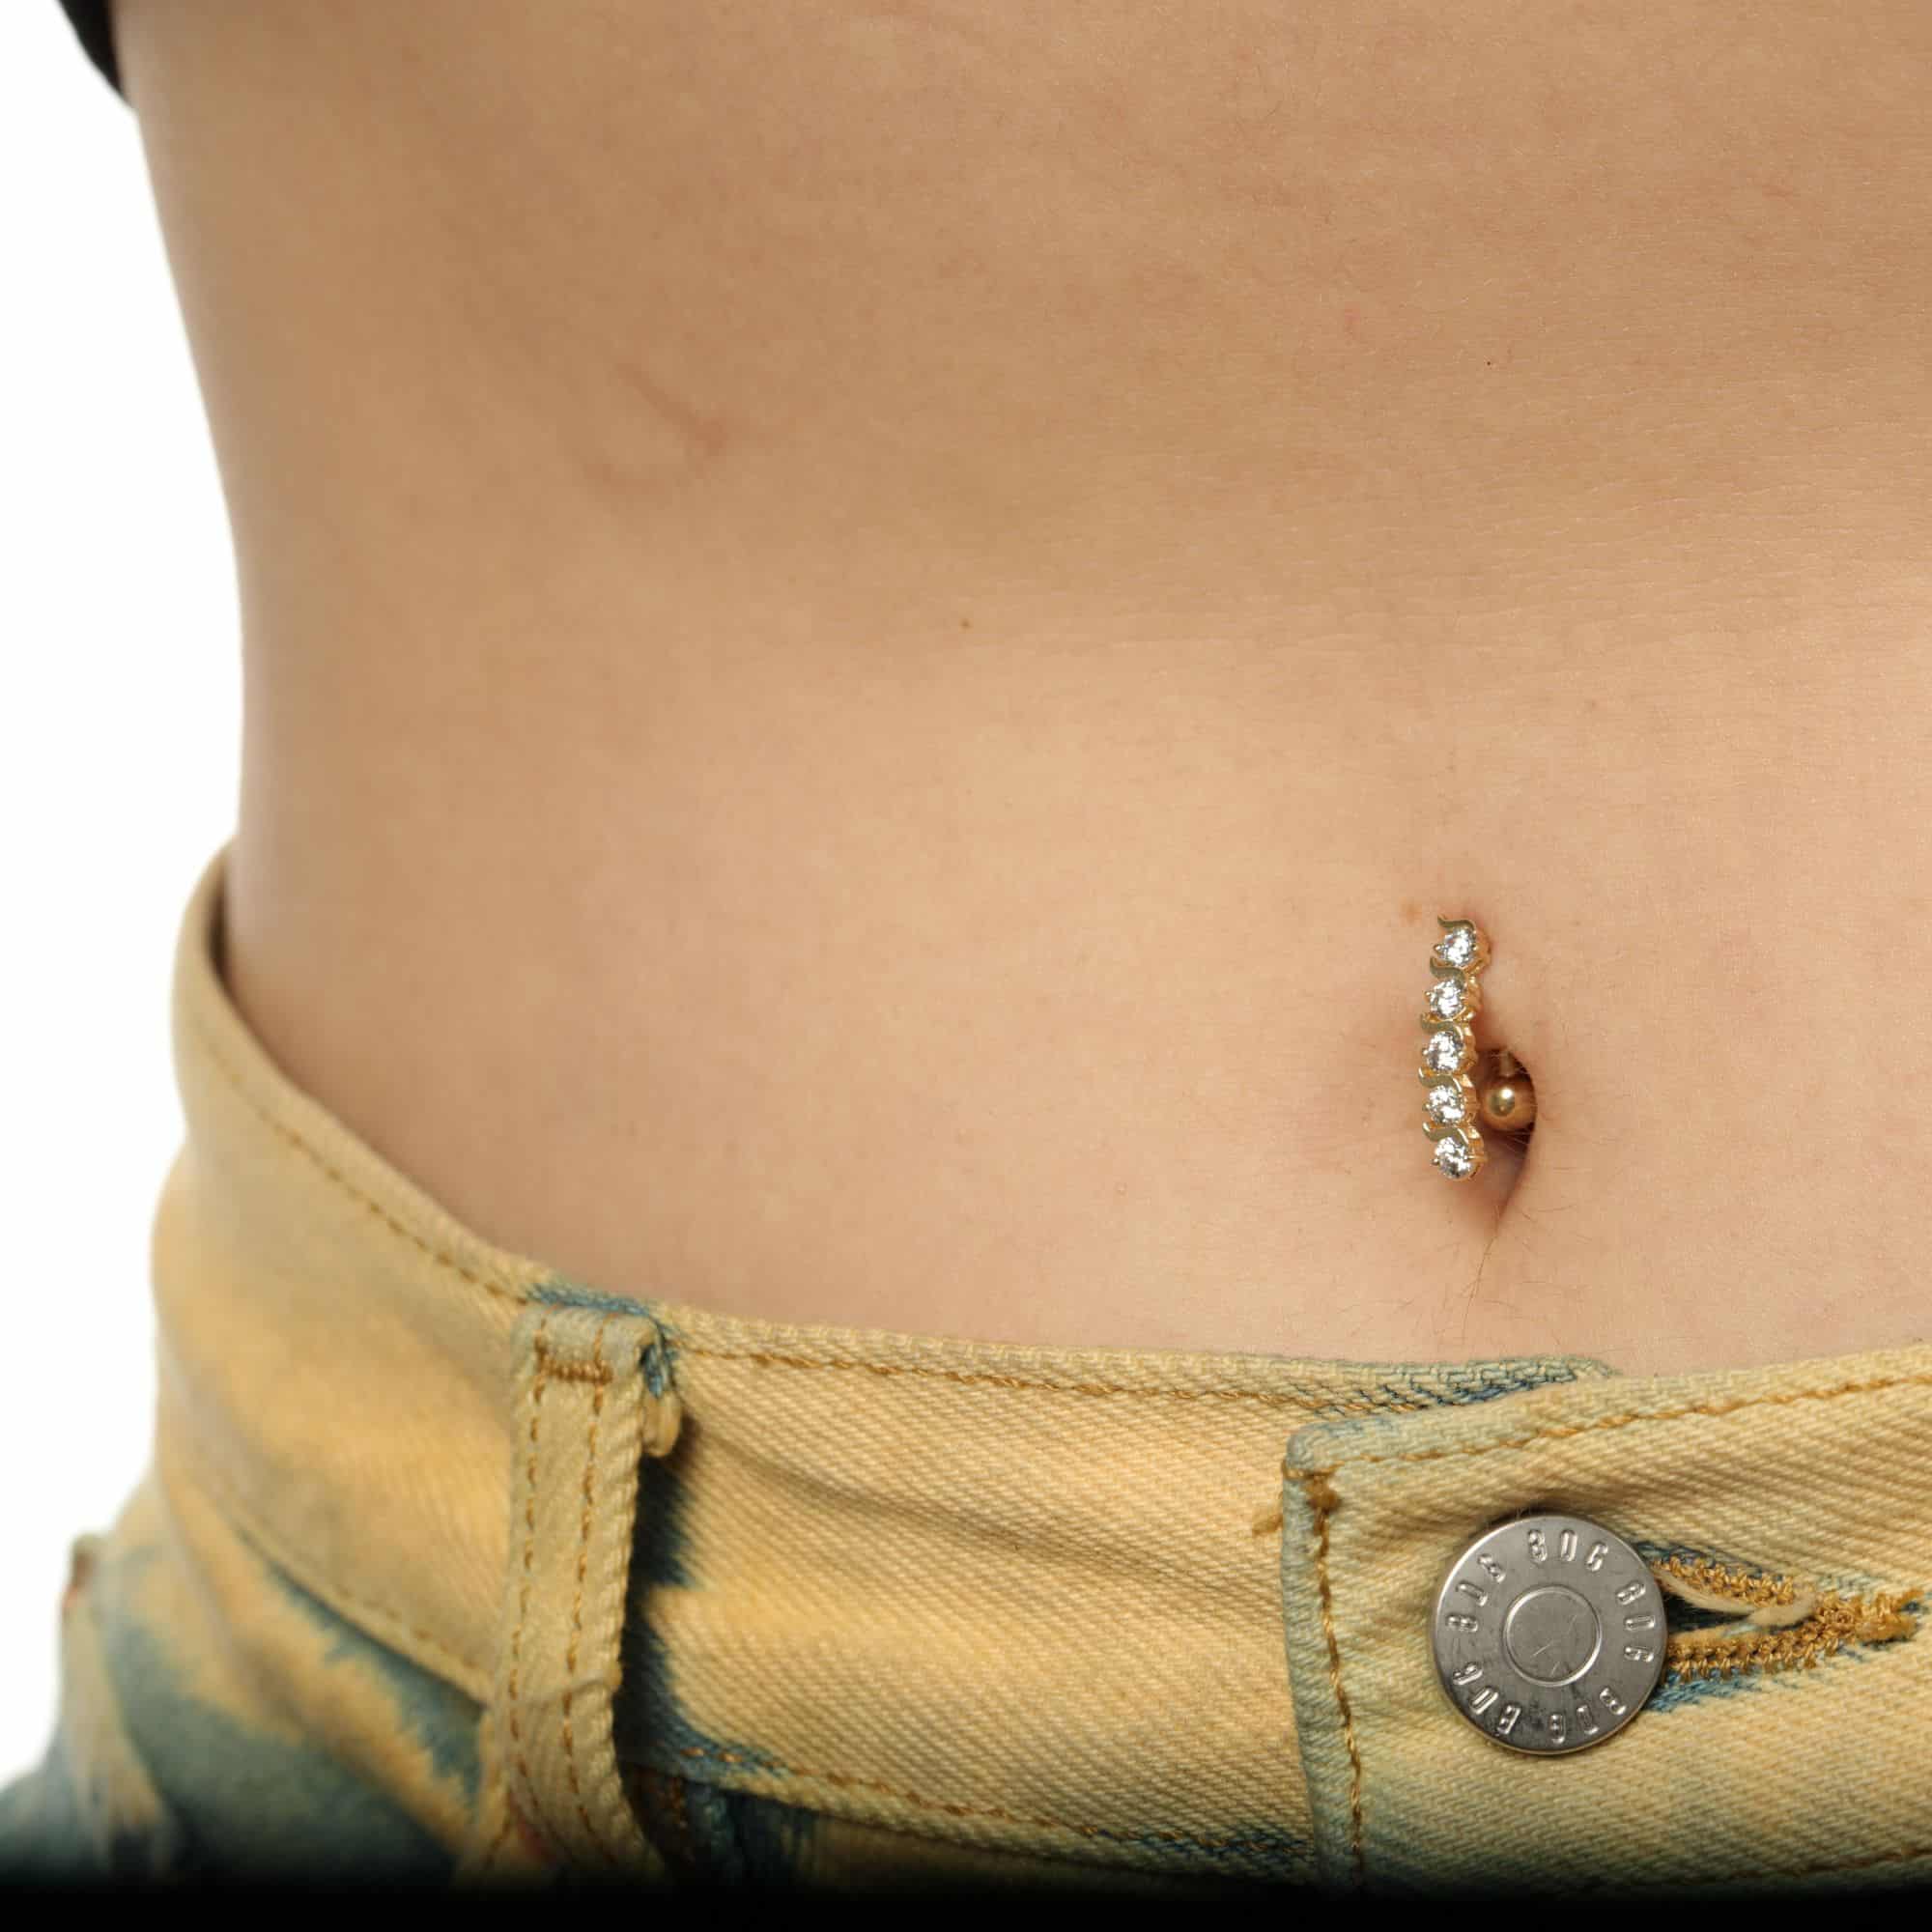 2 Styles Navel Piercing Simple Belly Ring Crystal Gold Belly Button Piercing  Jewelry Women Body Piercing Care Belly Care Ring | Wish